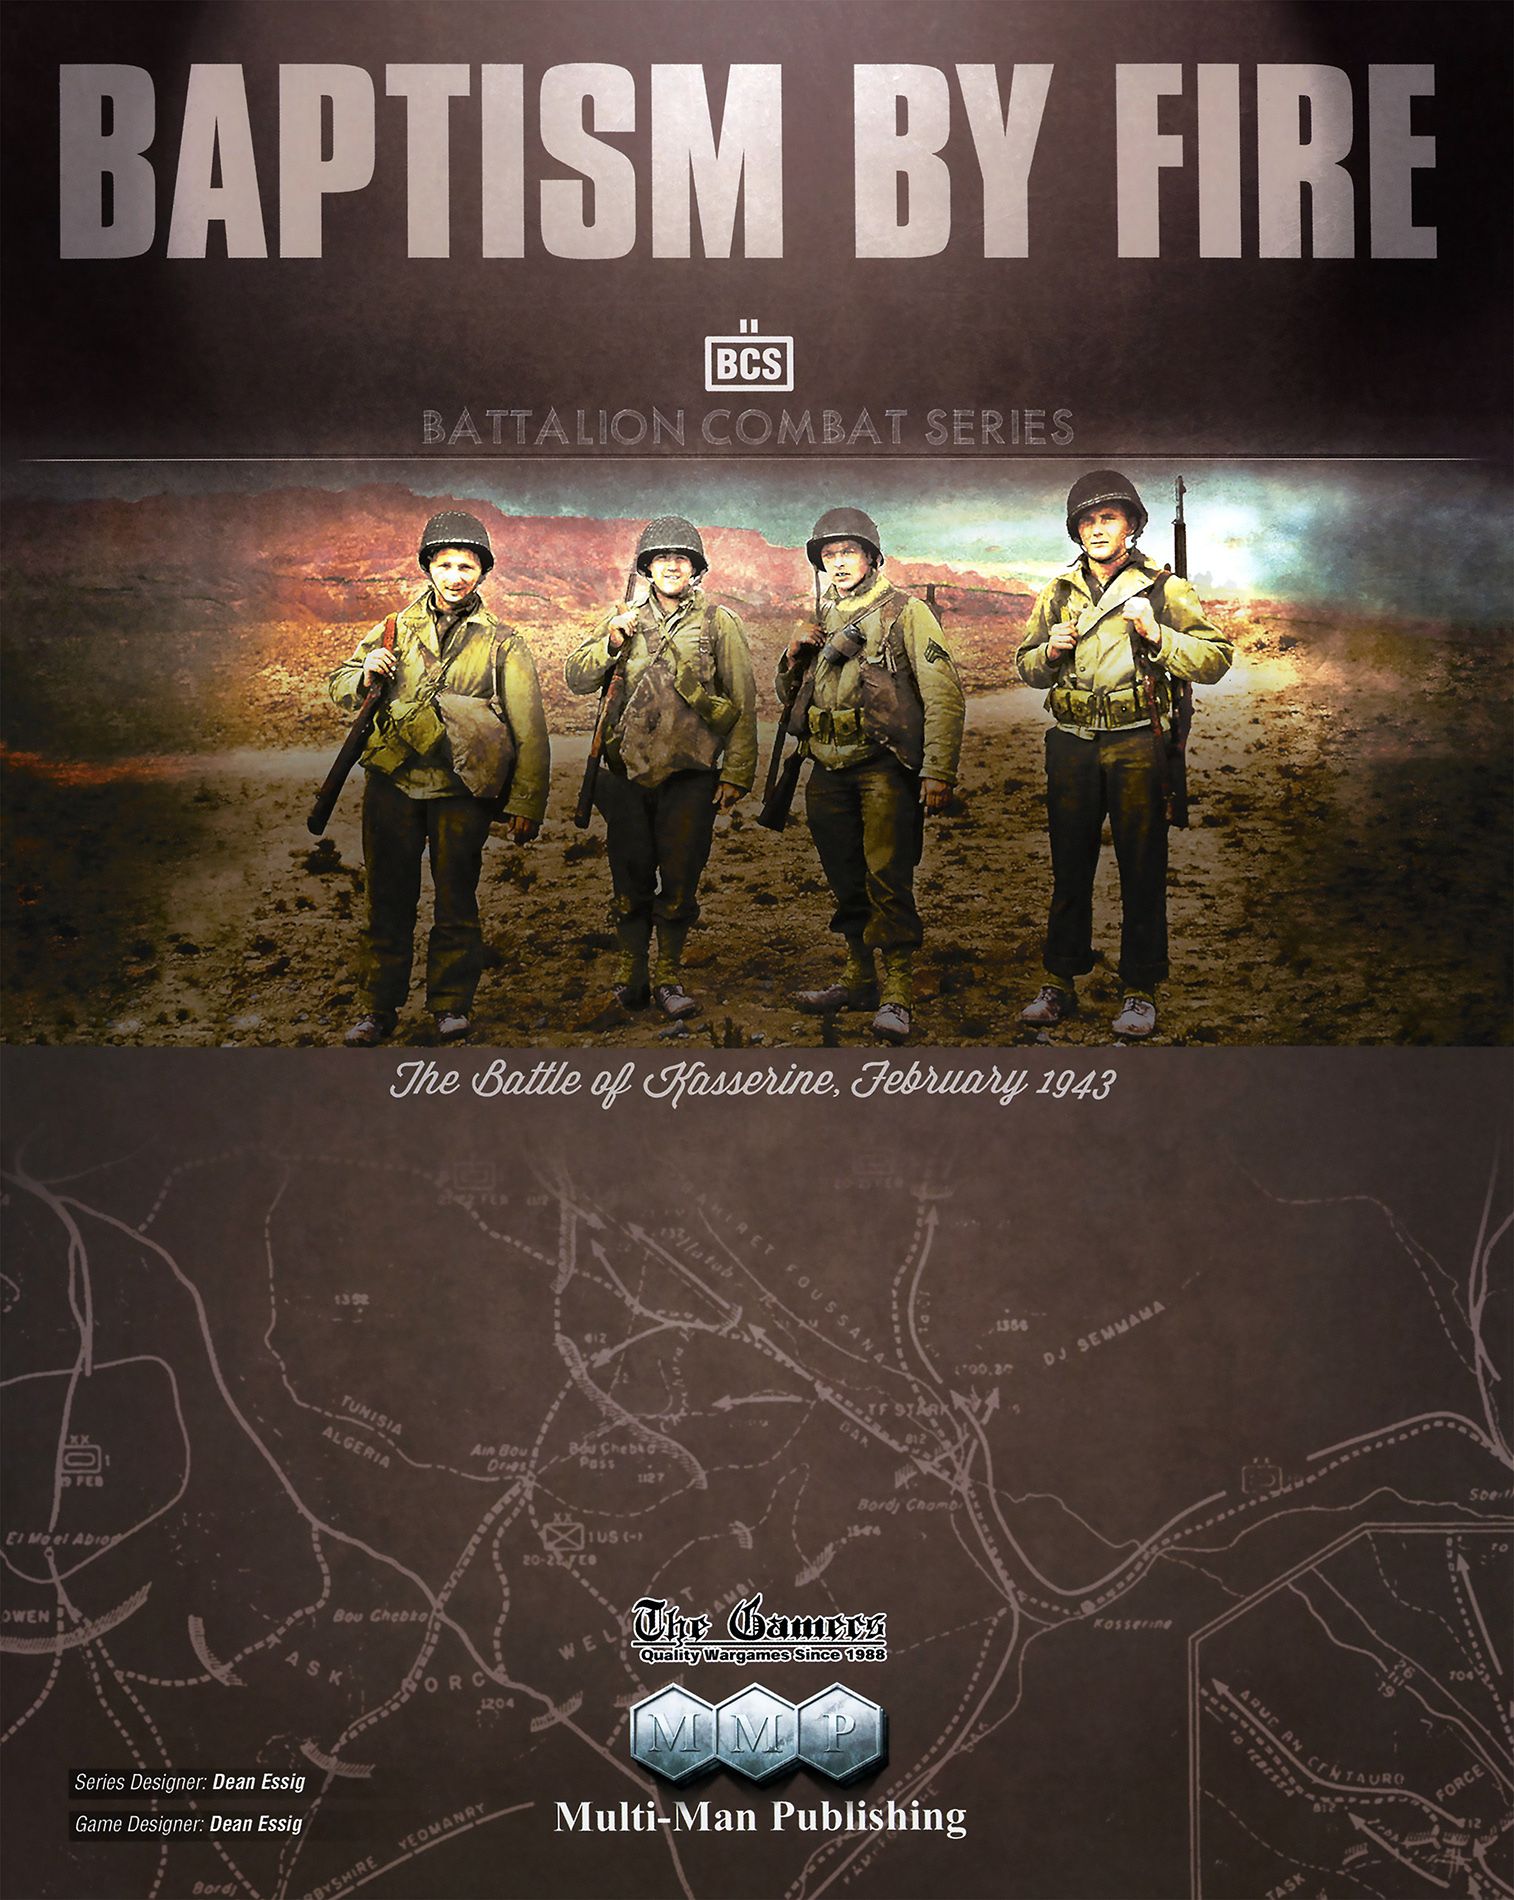 Baptism By Fire: The Battle of Kasserine, February 1943